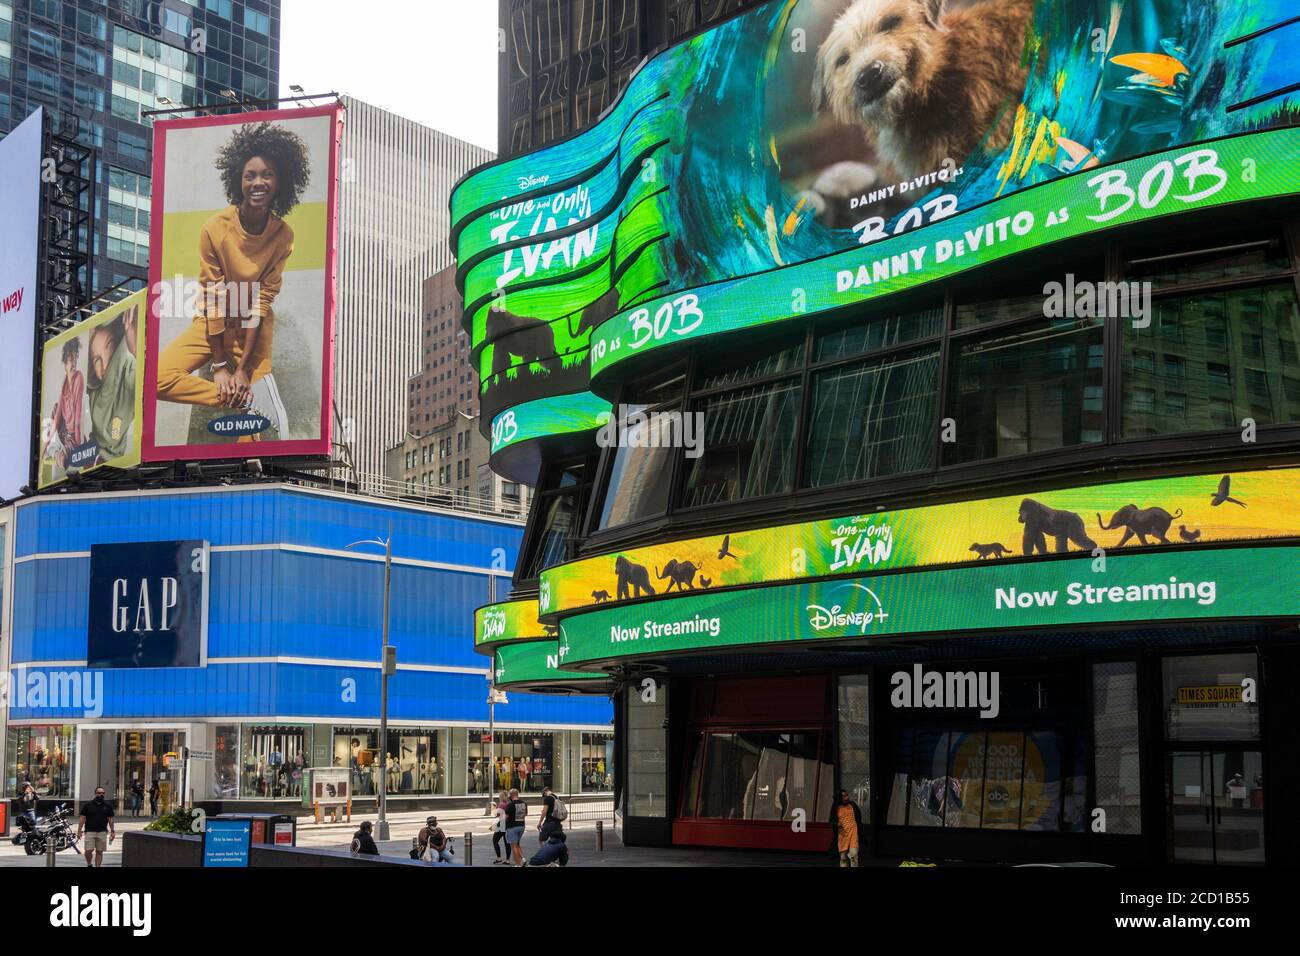 Wrap Around Moving Billboard in den ABC TV News Network Studios in Times Square, NYC, USA Stockfoto